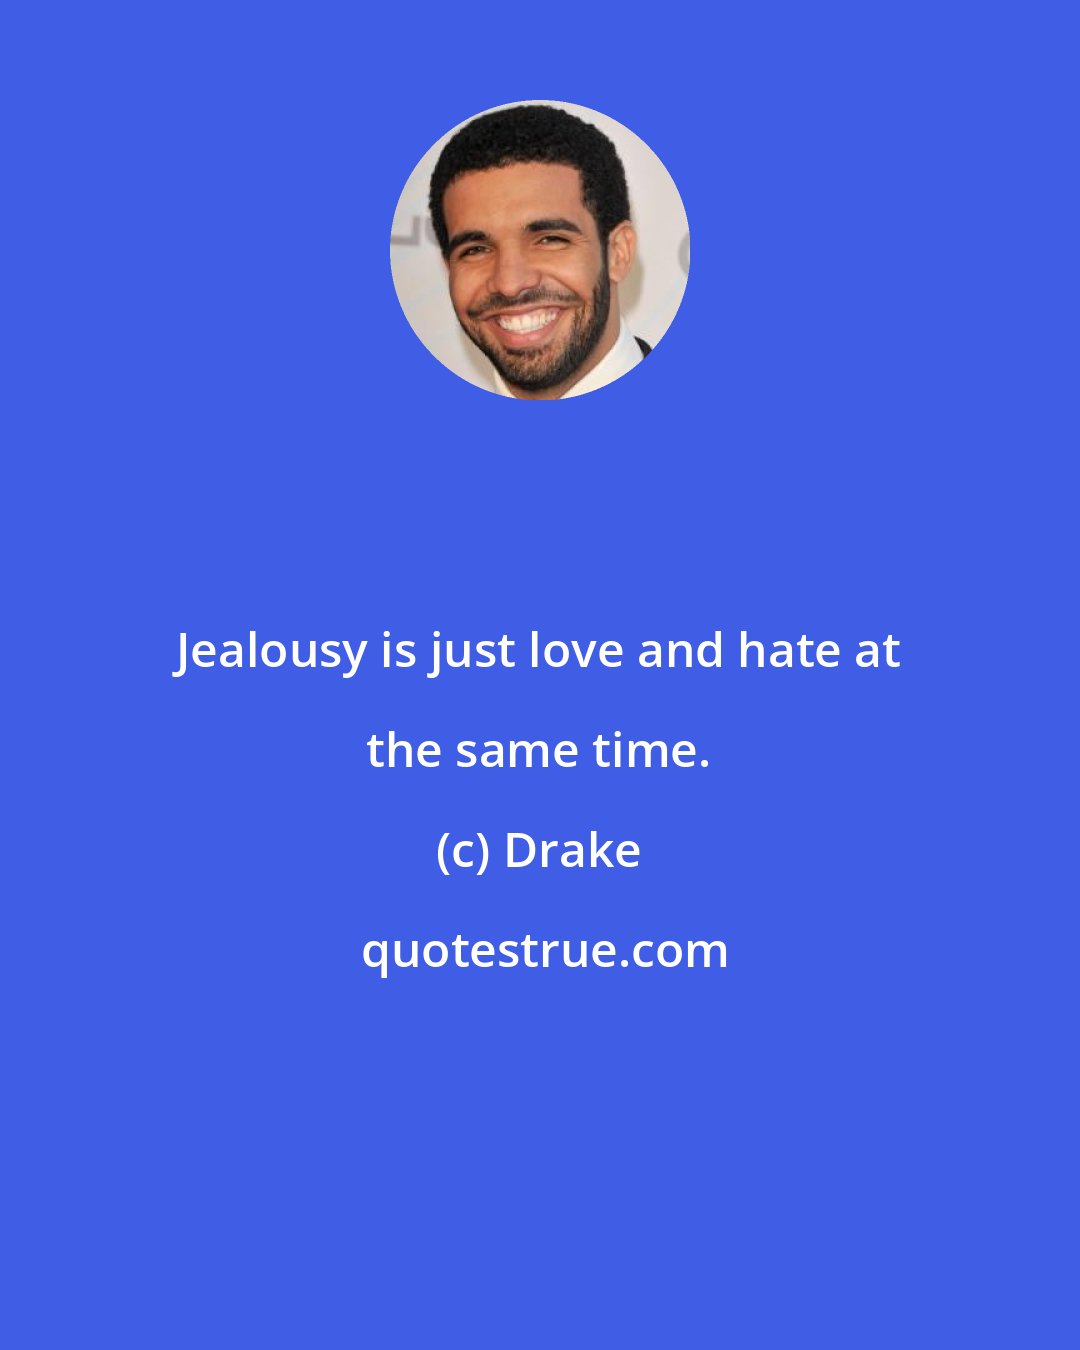 Drake: Jealousy is just love and hate at the same time.